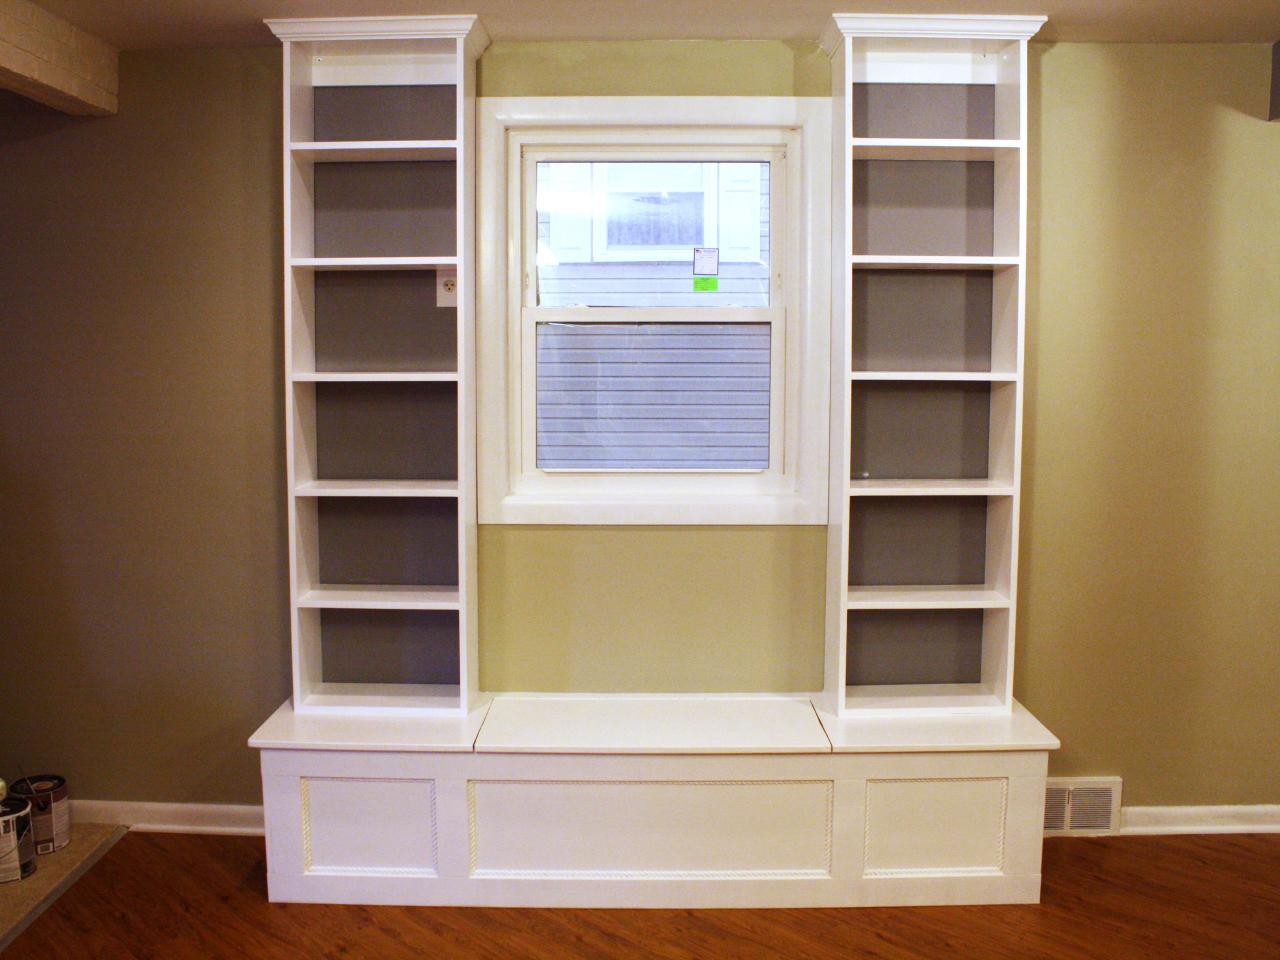 How to Build a Window Bench With Shelving how-tos DIY